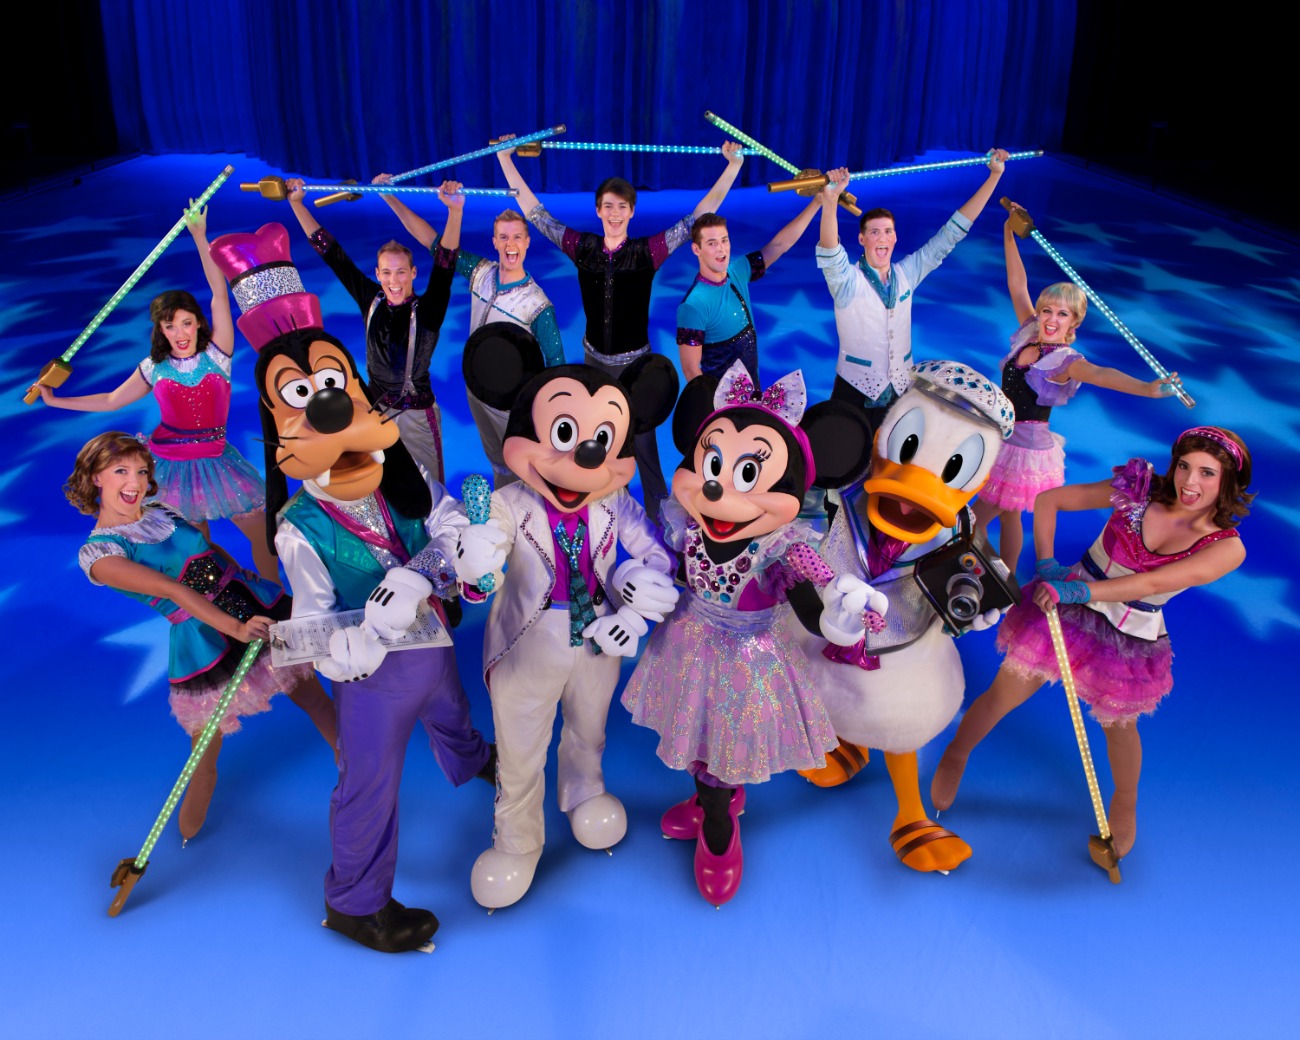 Lunchbox Dad Disney On Ice "Rockin' Ever After" is here in the San